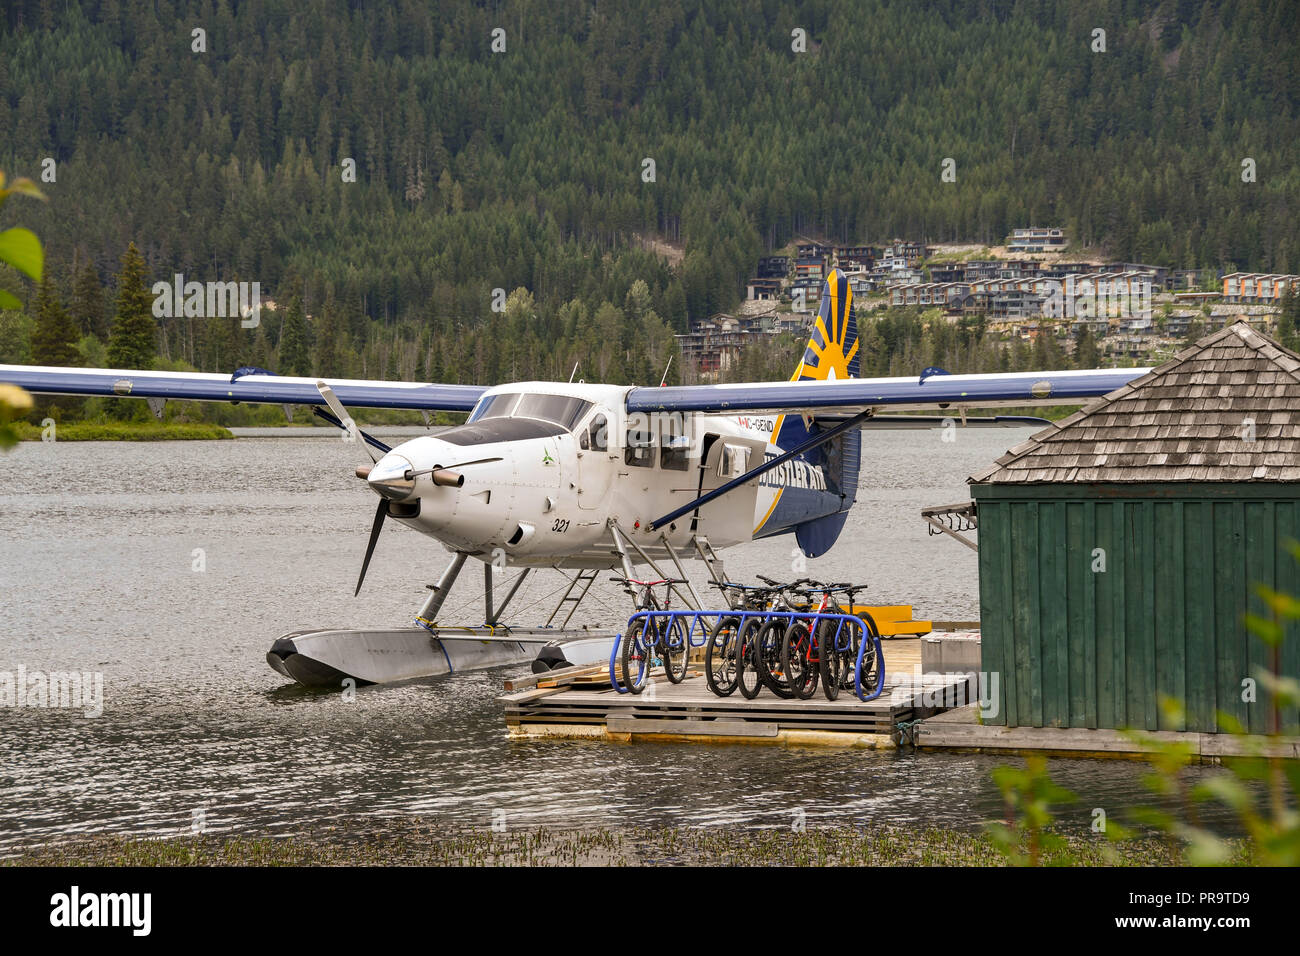 WHISTLER, BC, CANADA - JUNE 2018: Whistler Air De Havilland Turbine Otter aircraft tied up at the jetty of the seaplane terminal in Whistler. Stock Photo